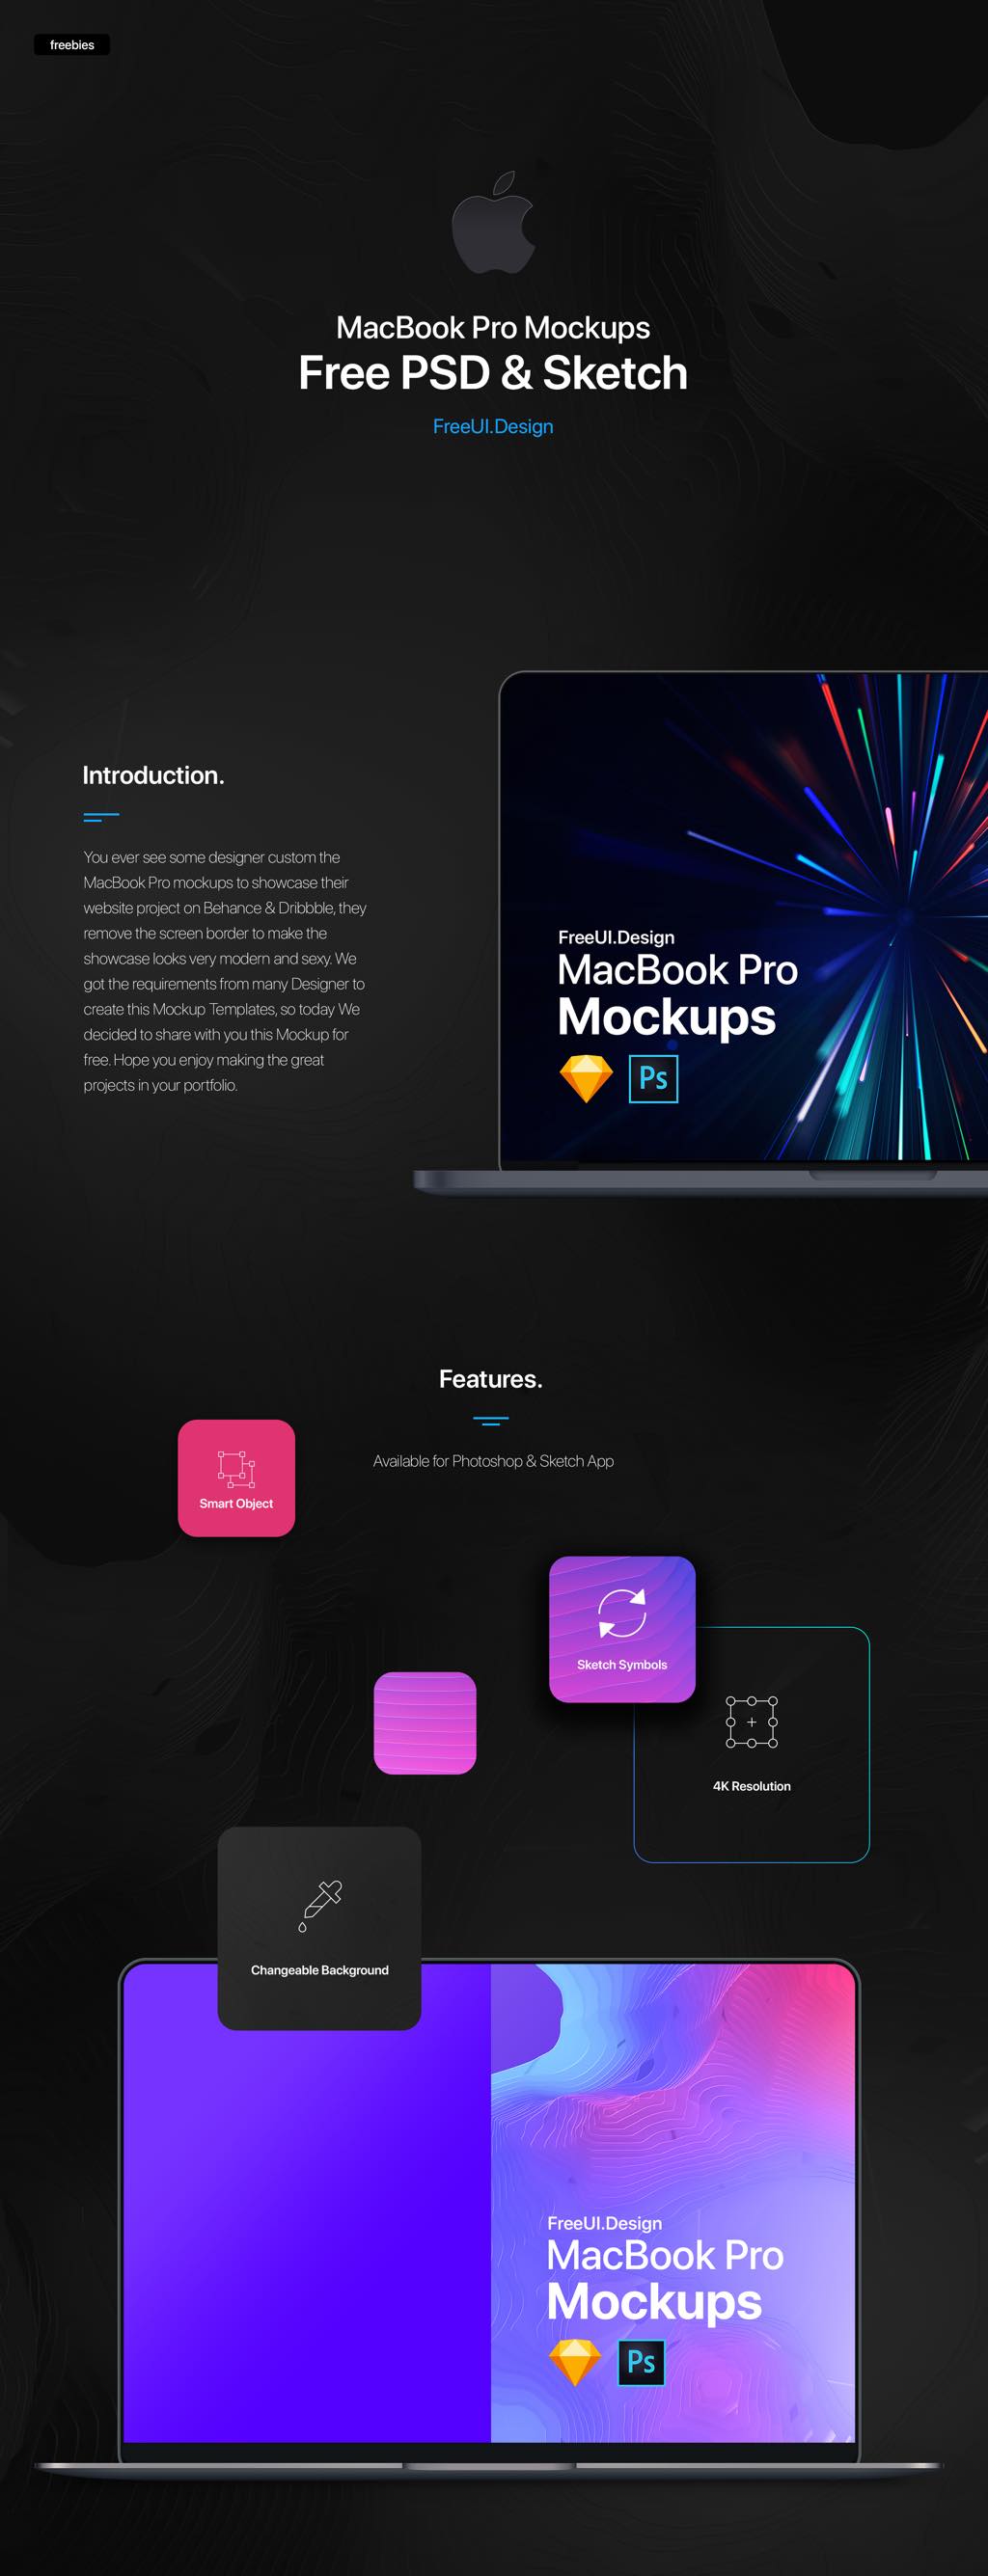 Download The New Apple Macbook Pro Mockups Tech All